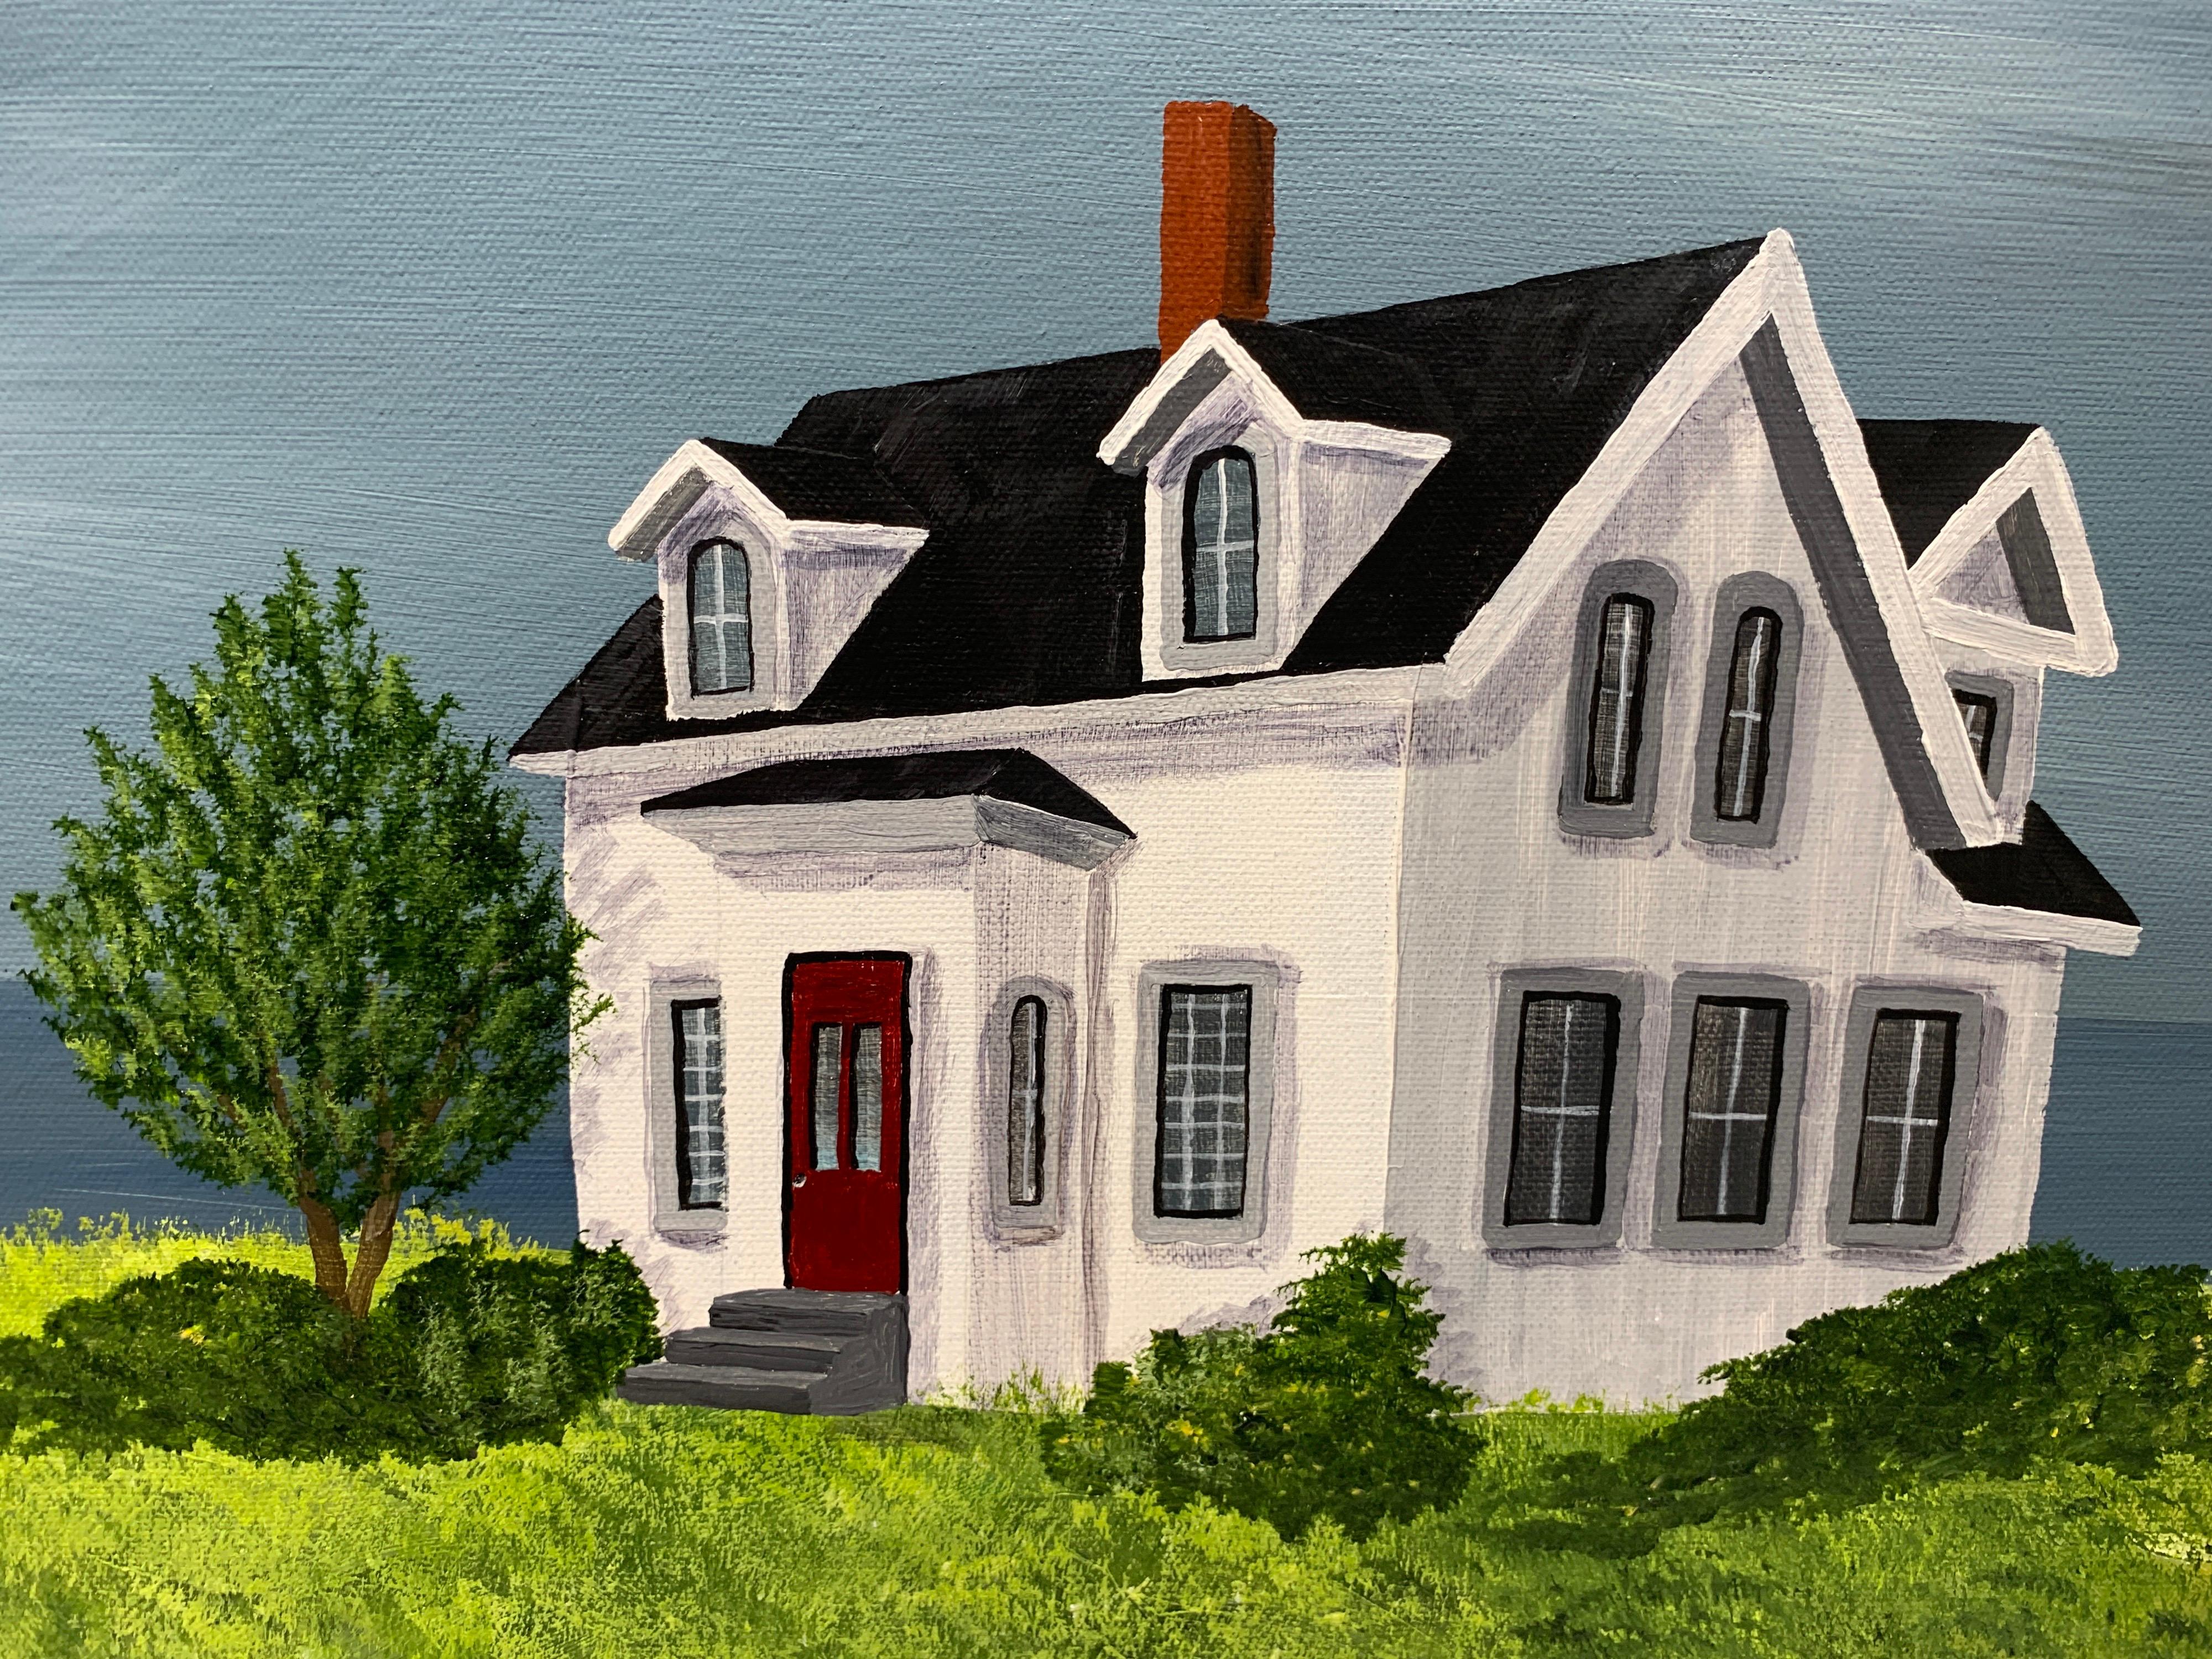 Sanctuary Cottage by Susan Kinsella, Nautical Acrylic on Canvas Painting 4